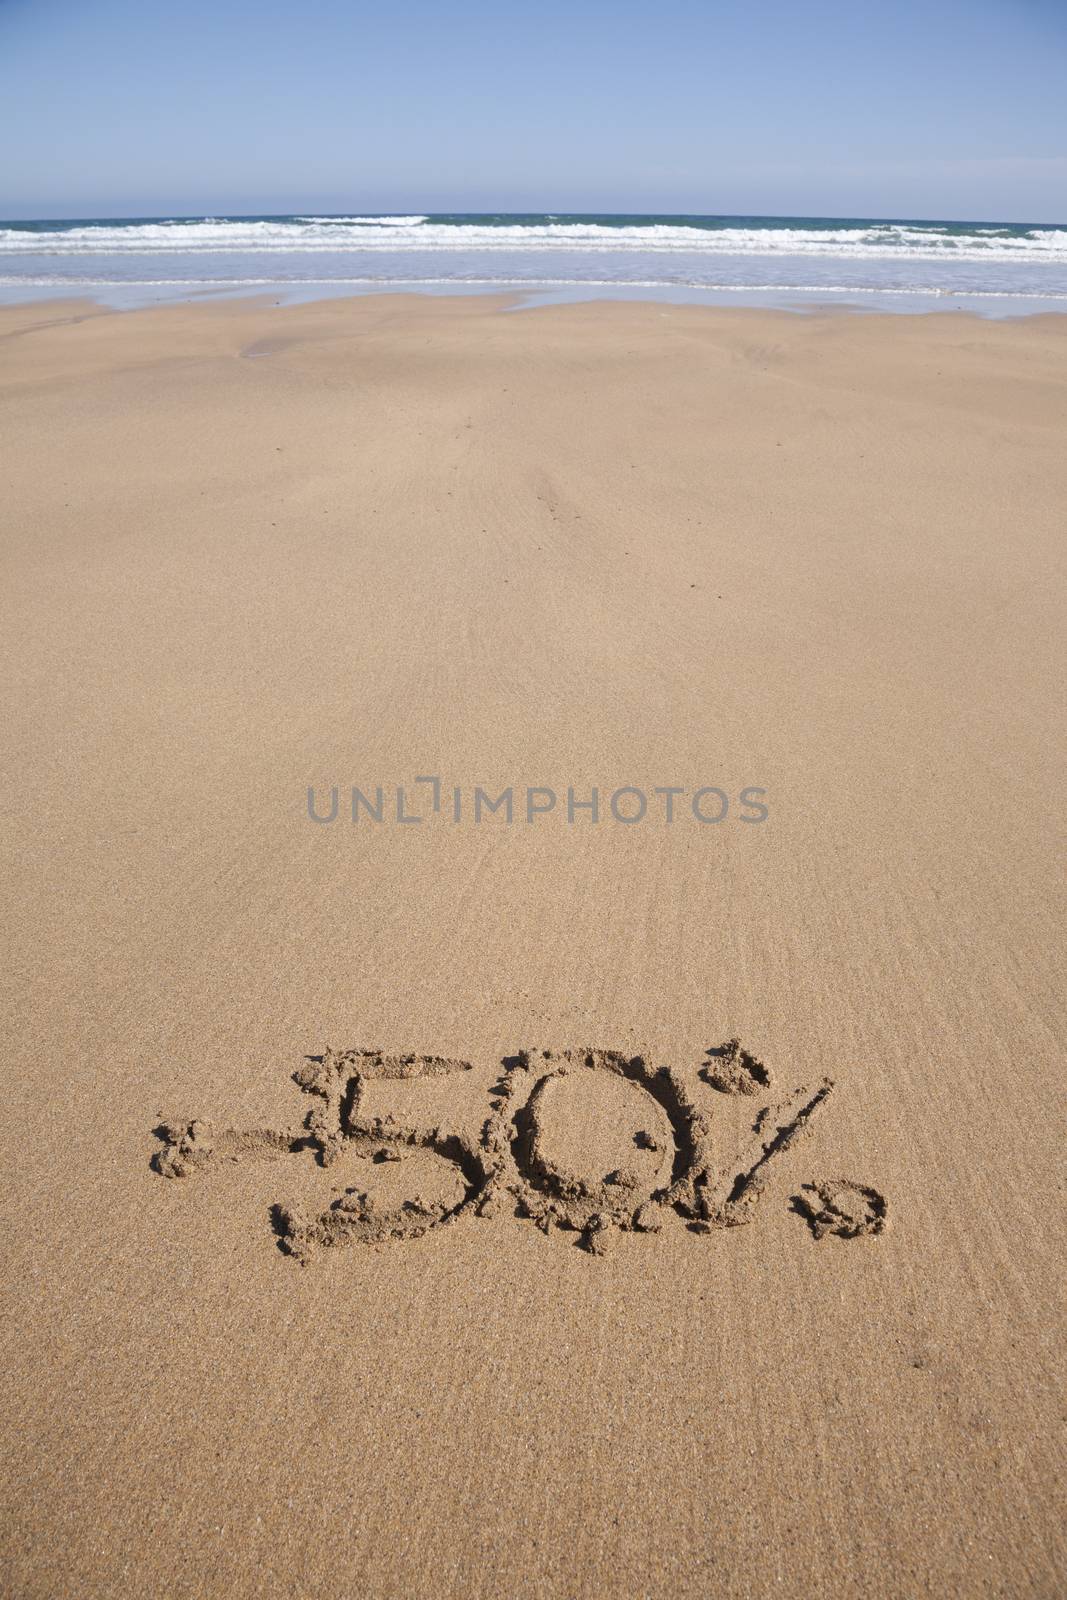 50 percent discount in earth text written on brown sand ground low tide beach ocean seashore in Spain Europe